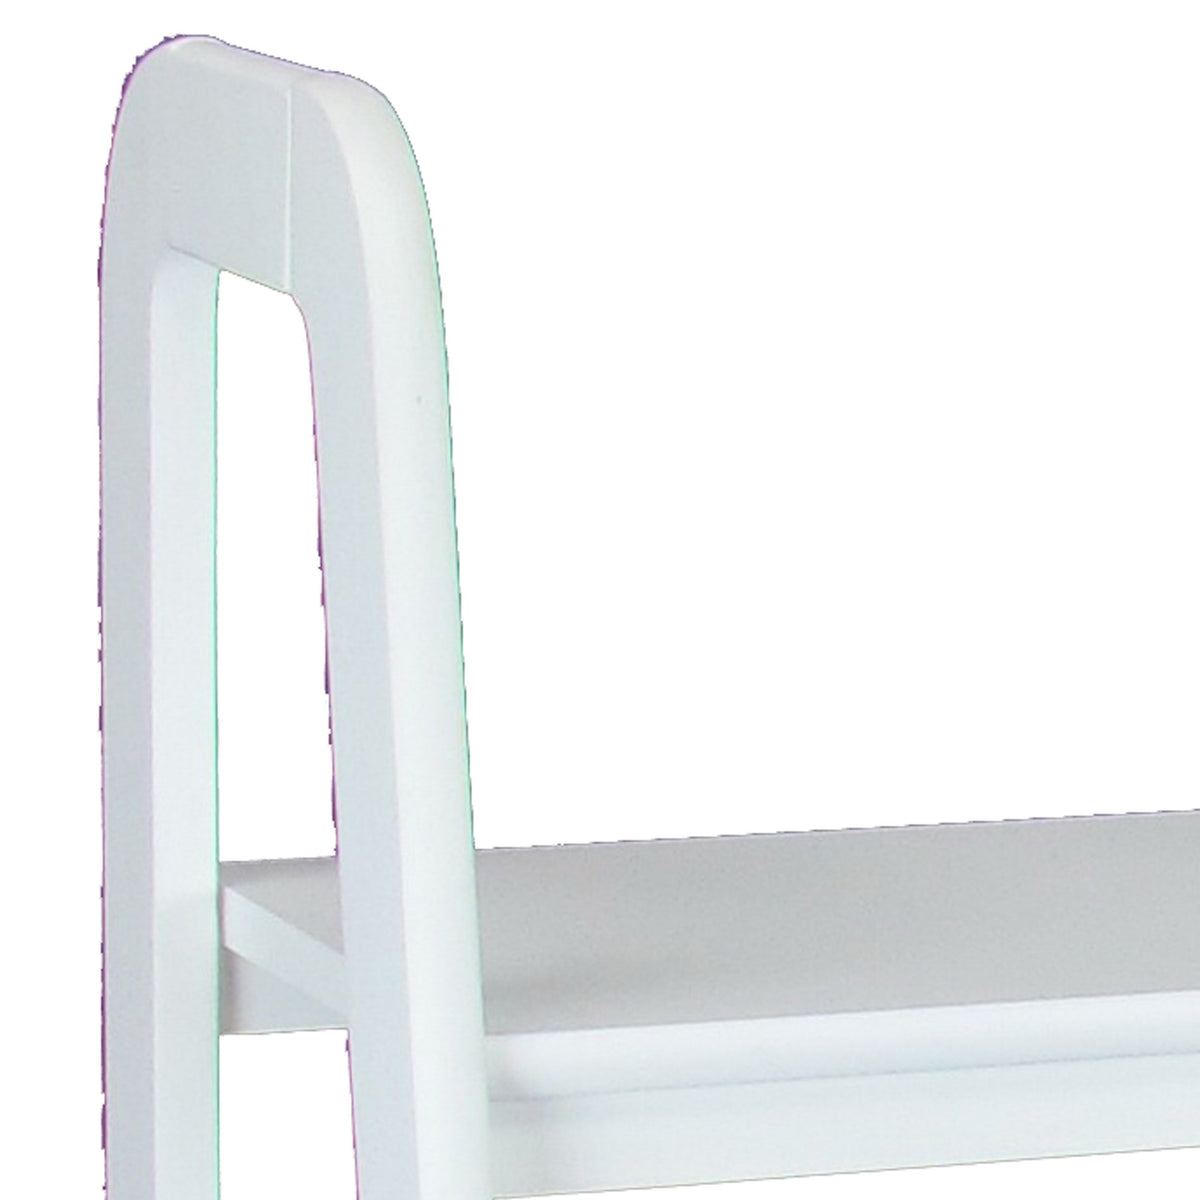 3 Tier Wooden Storage Ladder Stand with Open Back and Sides, White - BM210421